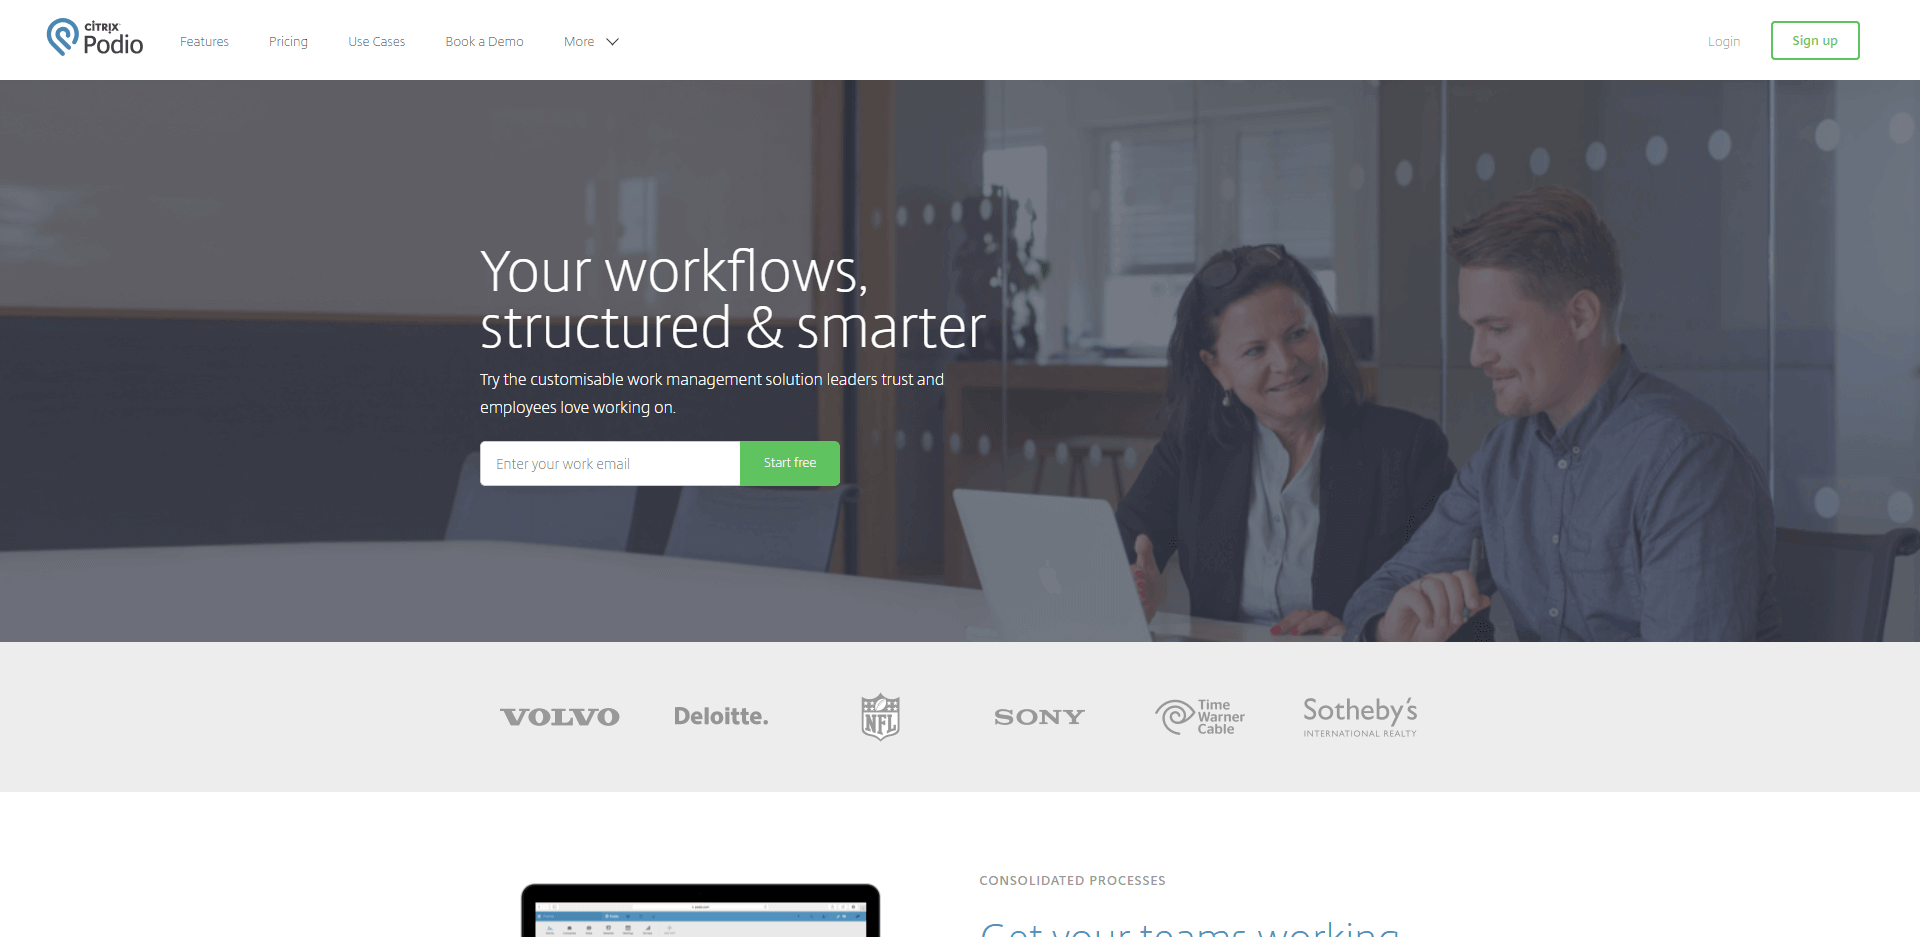 Podio: Your workflows, structured & smarter